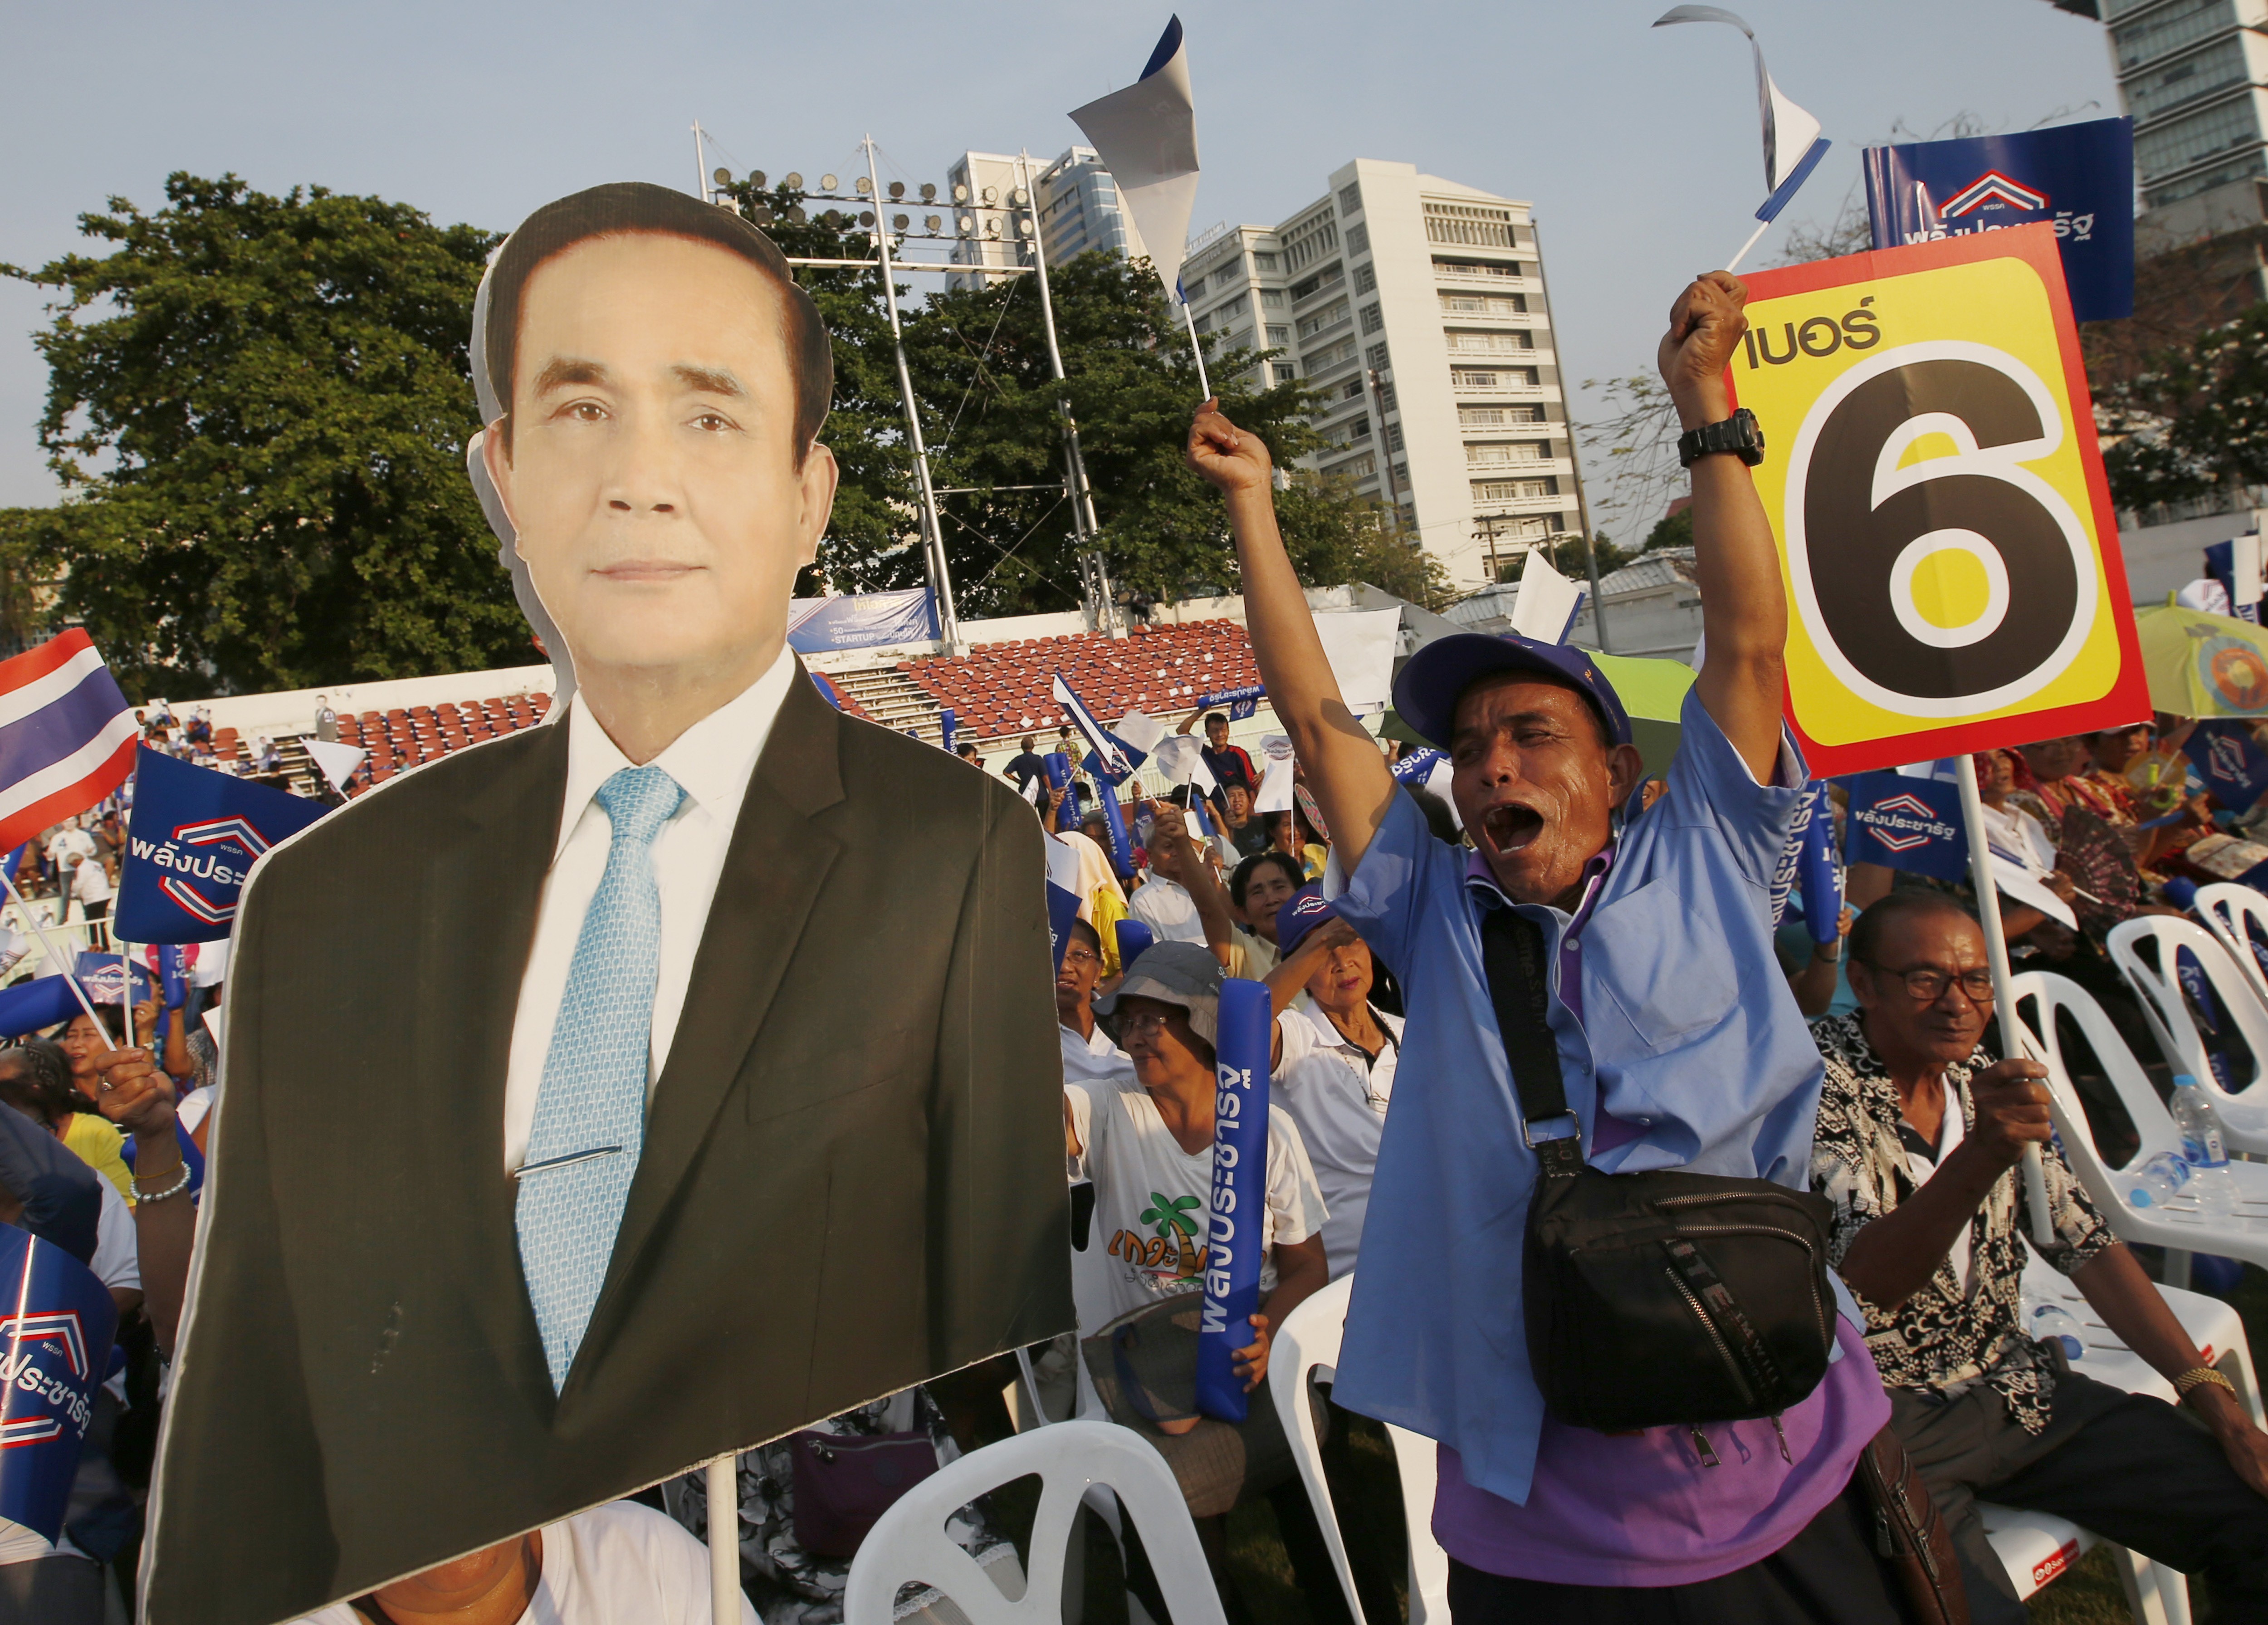 Supporters of the Palang Pracharat Party hold a poster of the Thai Prime Minister Prayuth Chan-ocha during a rally in Bangkok. Photo: AP